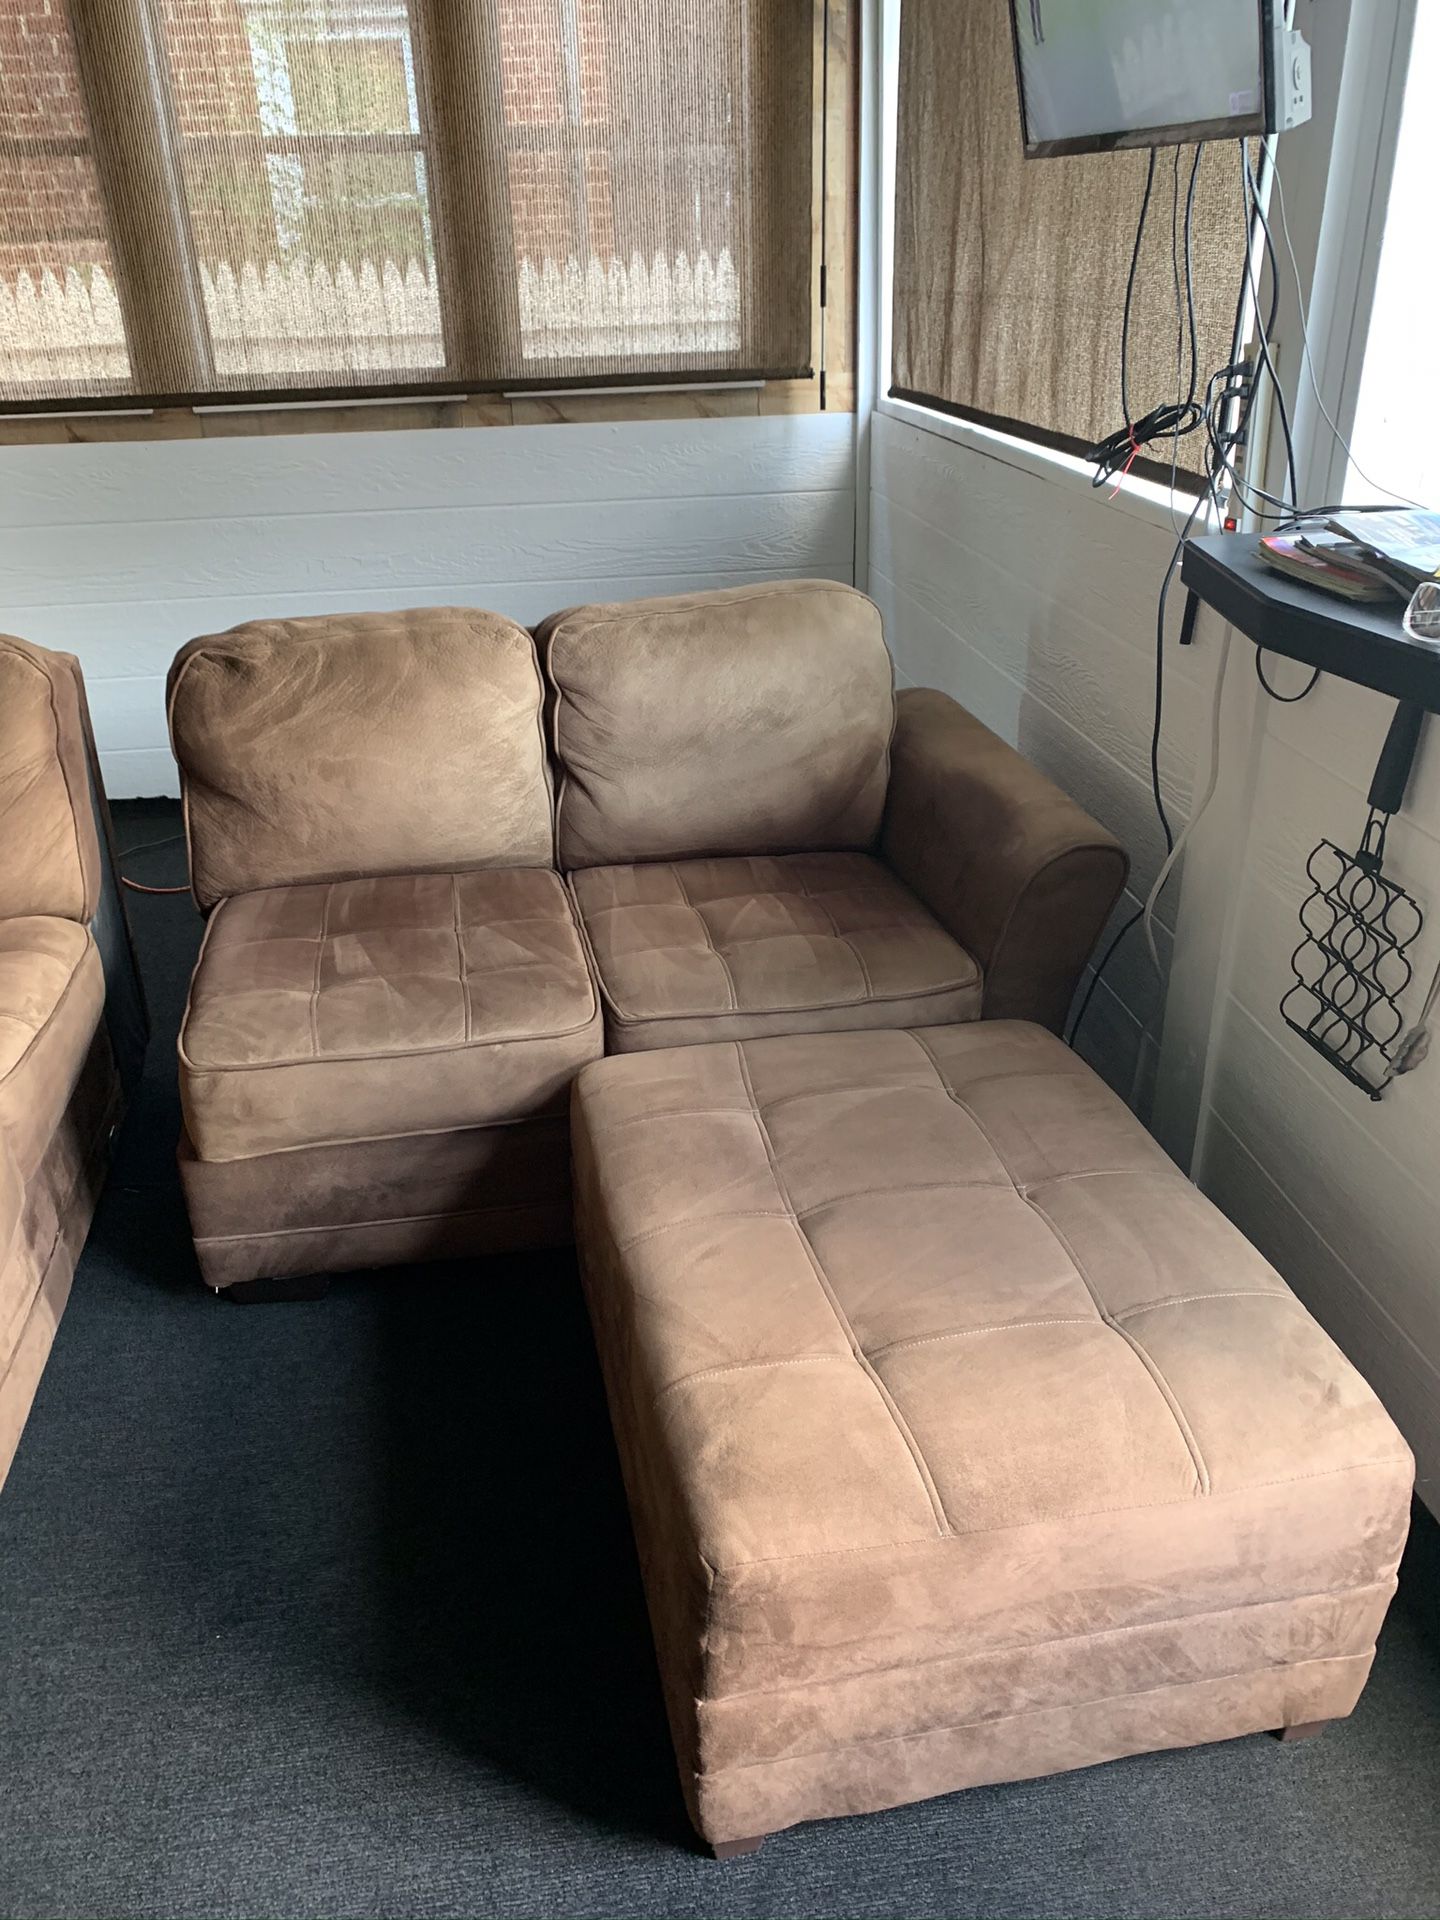 L shape couch and ottoman